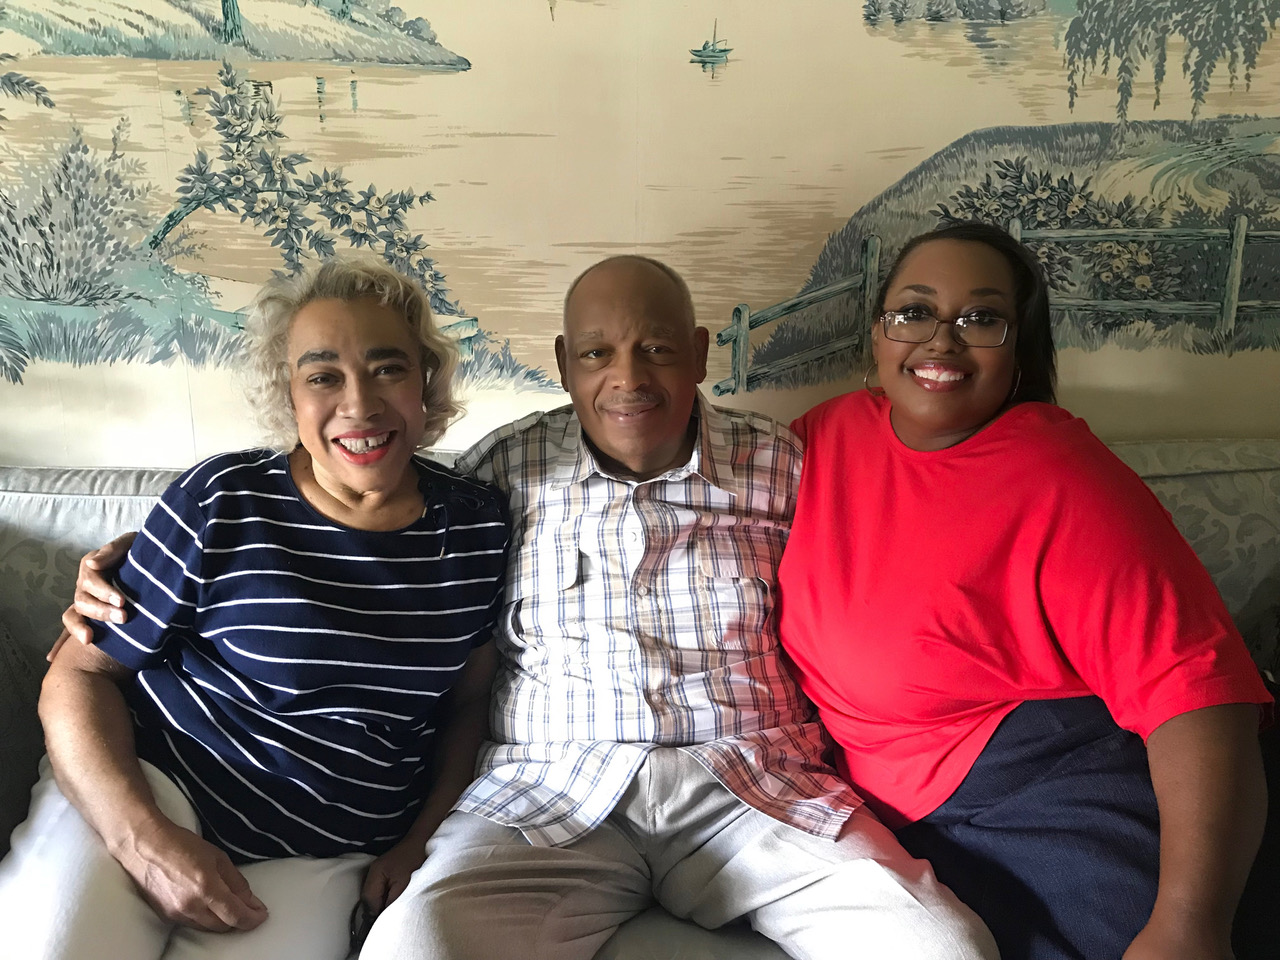 Three smiling adults posing on a couch.